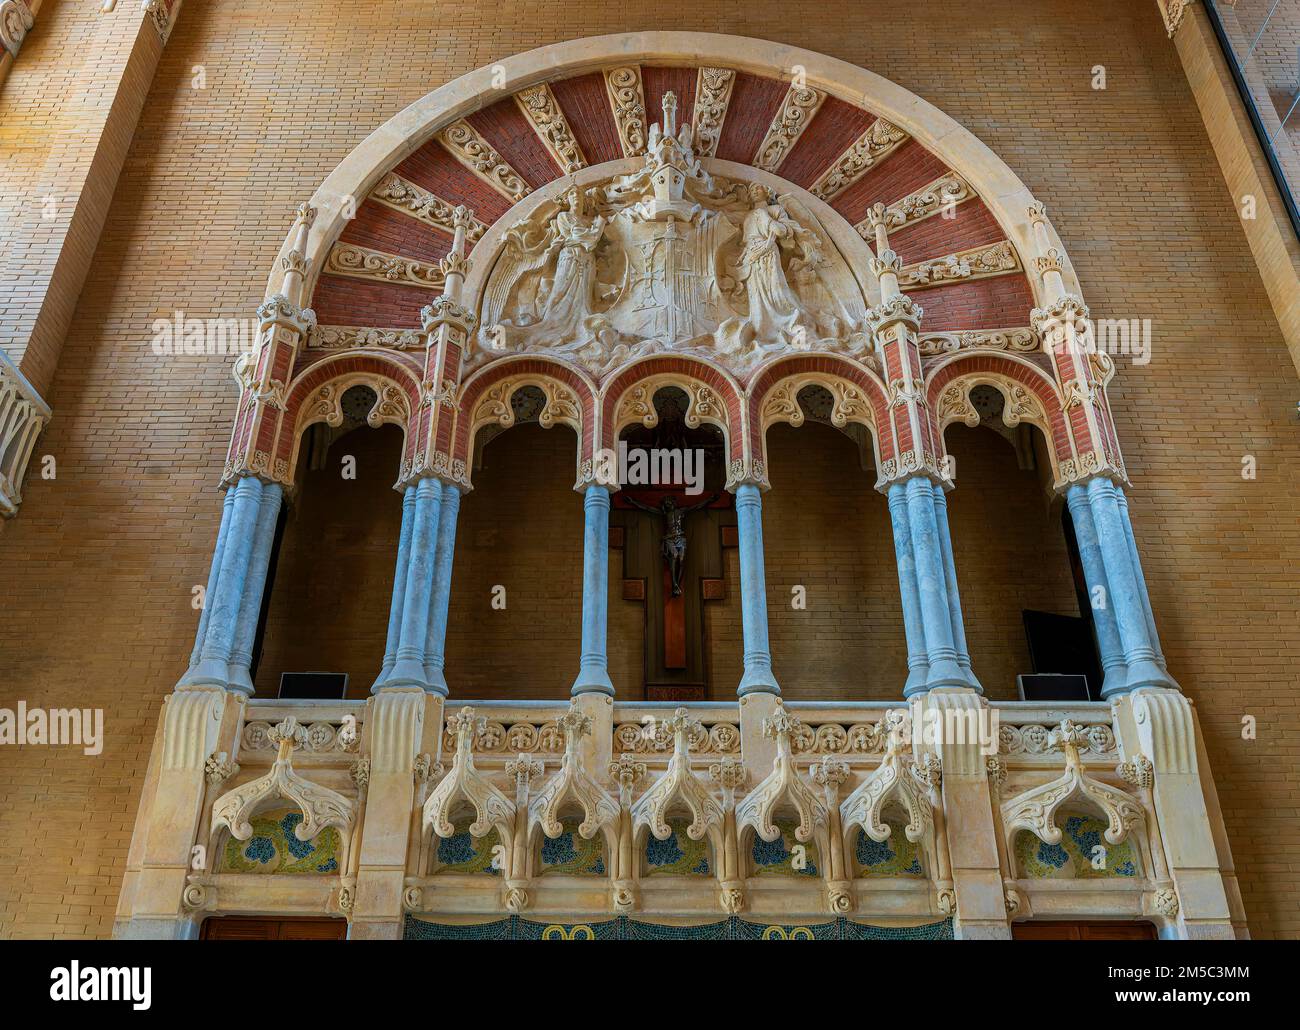 Interior view of the hall and corridors in the main building in the Hospital de la Santa Creu i Sant Pau by architect Lluis Domenech i Montaner Stock Photo